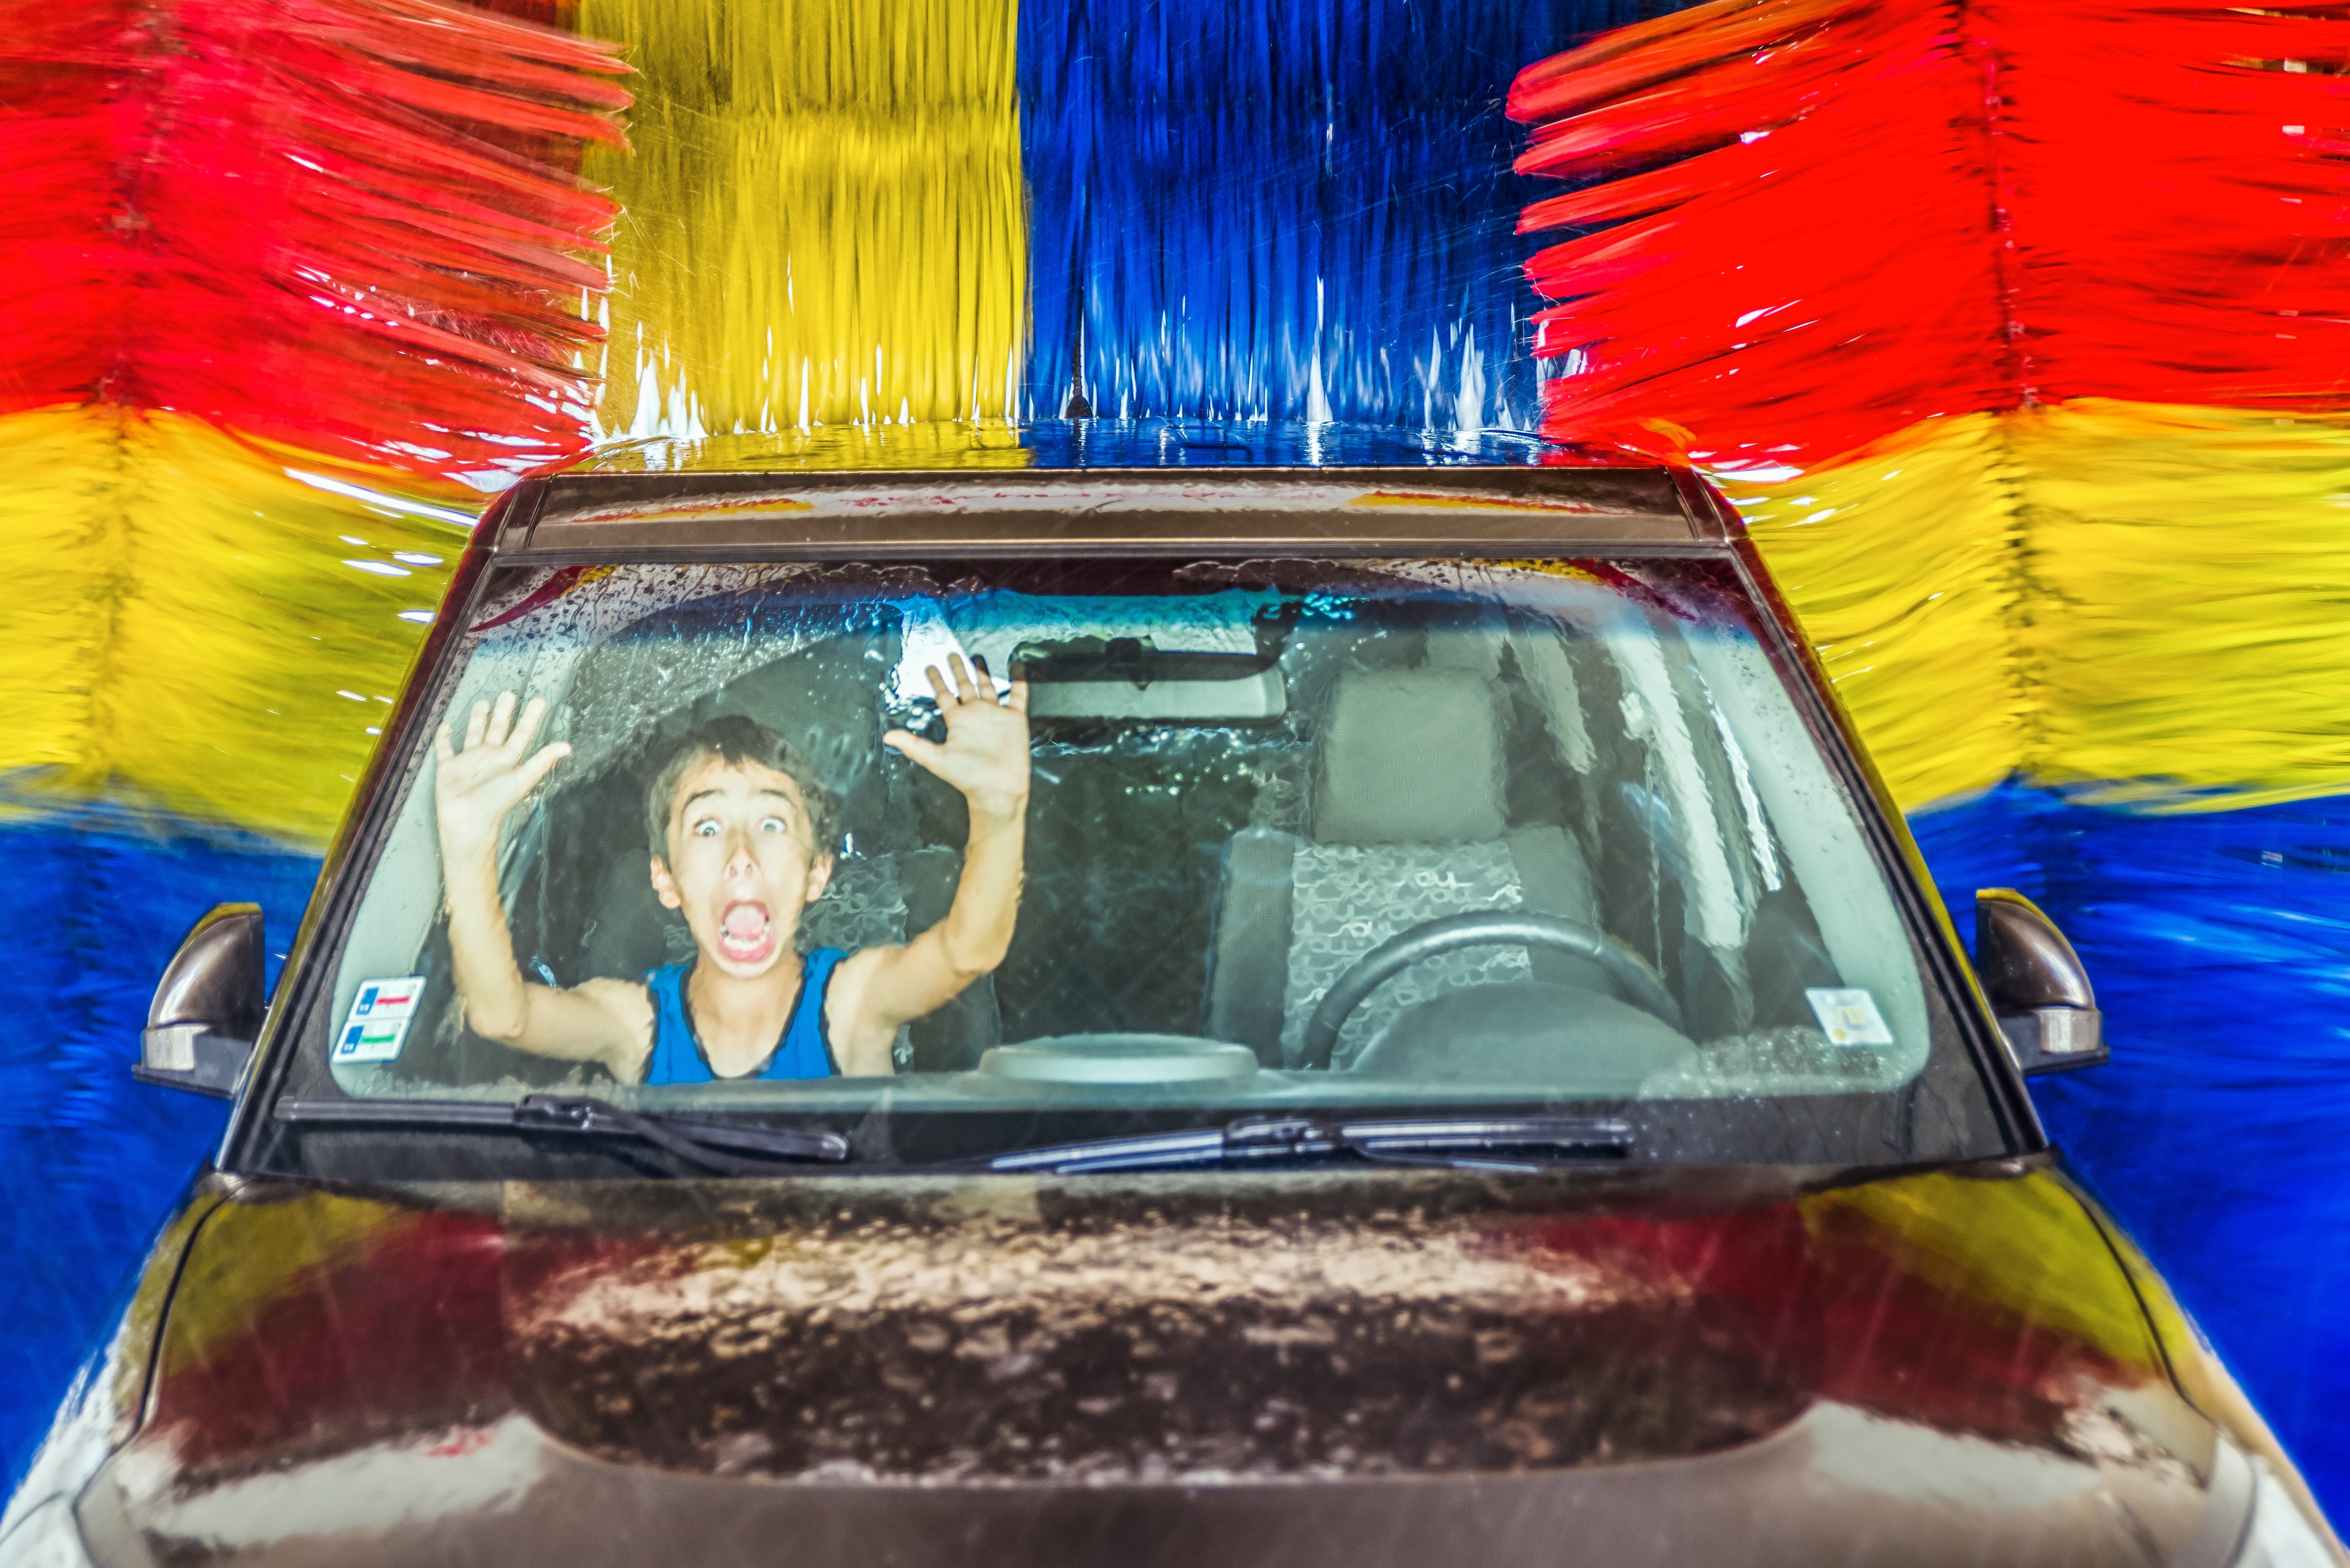 Boy in a car at automatic car wash | Source: Shutterstock